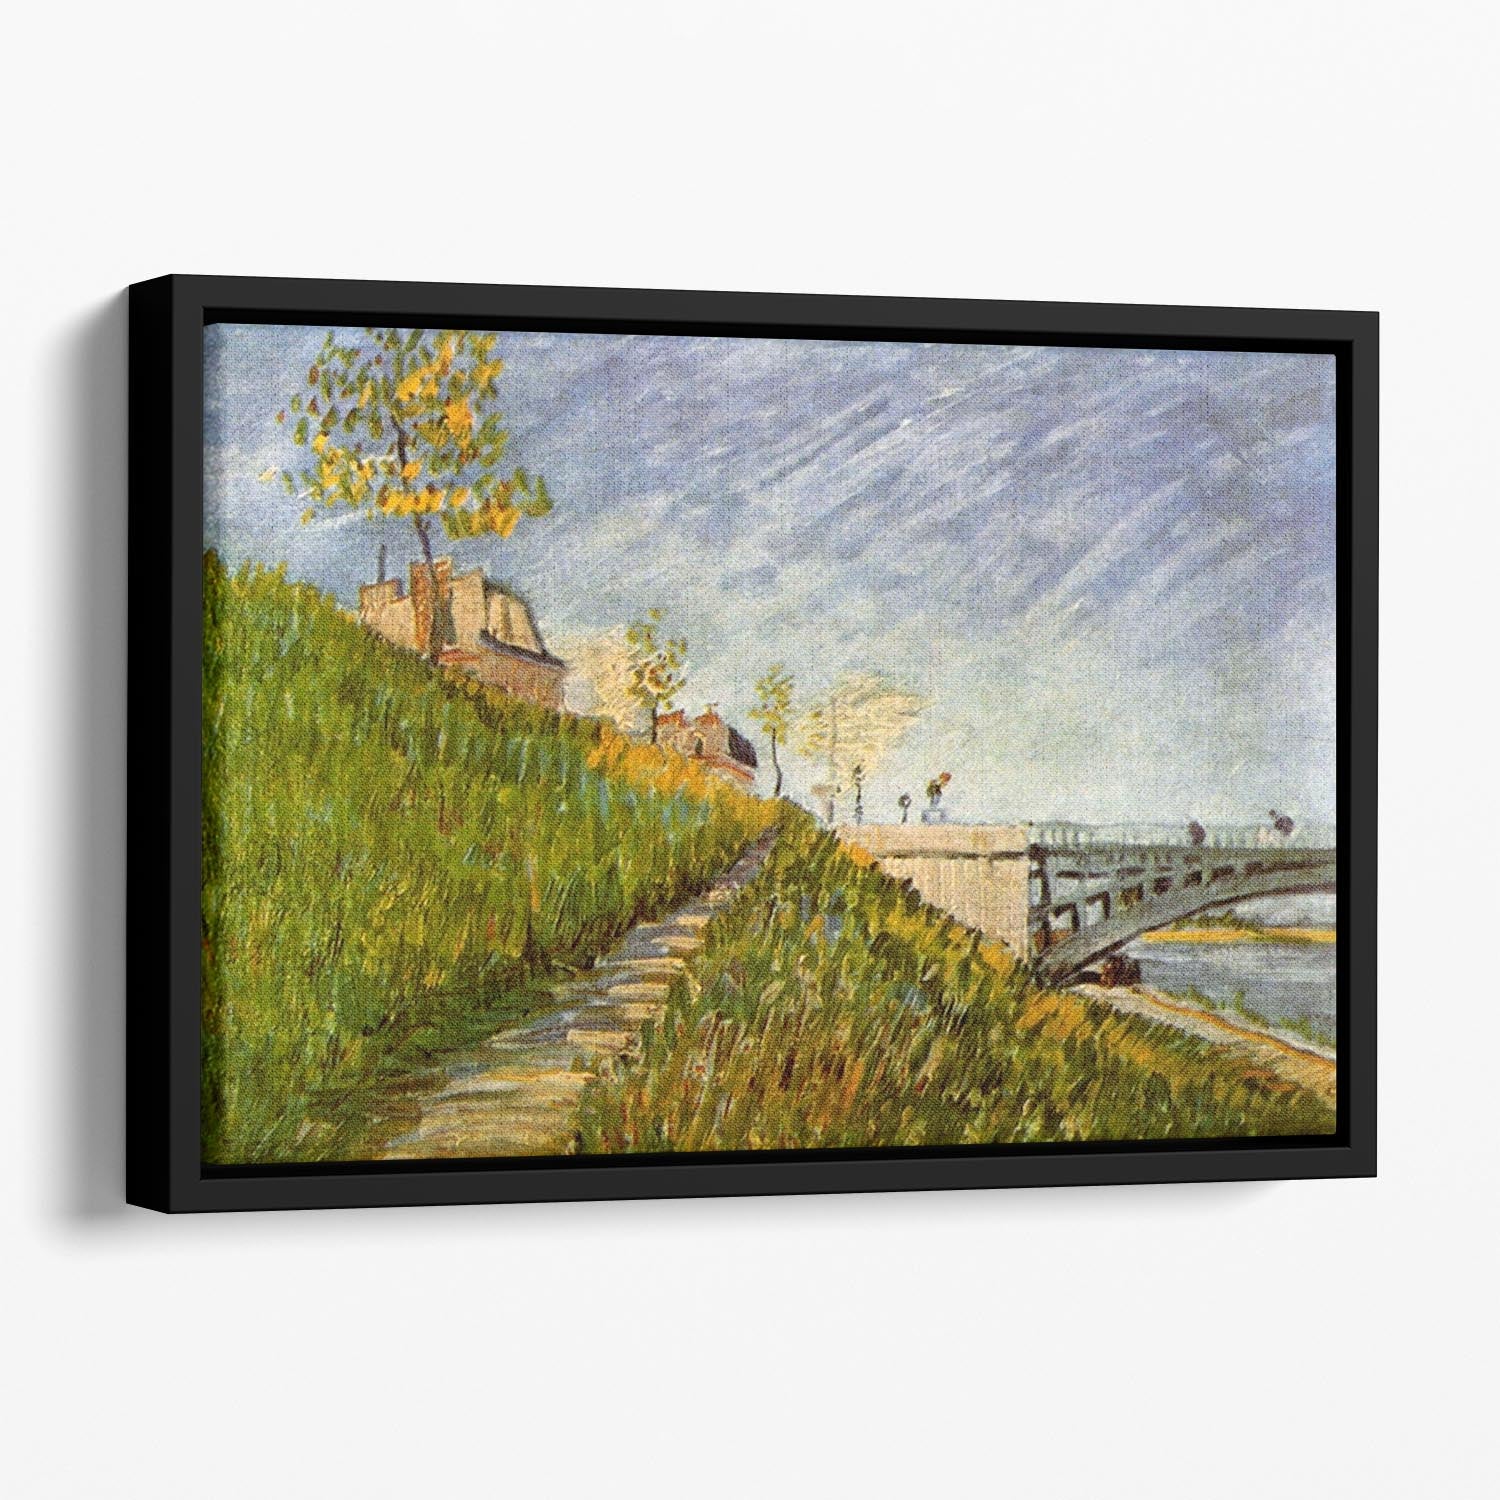 Banks of the Seine with Pont de Clichy by Van Gogh Floating Framed Canvas